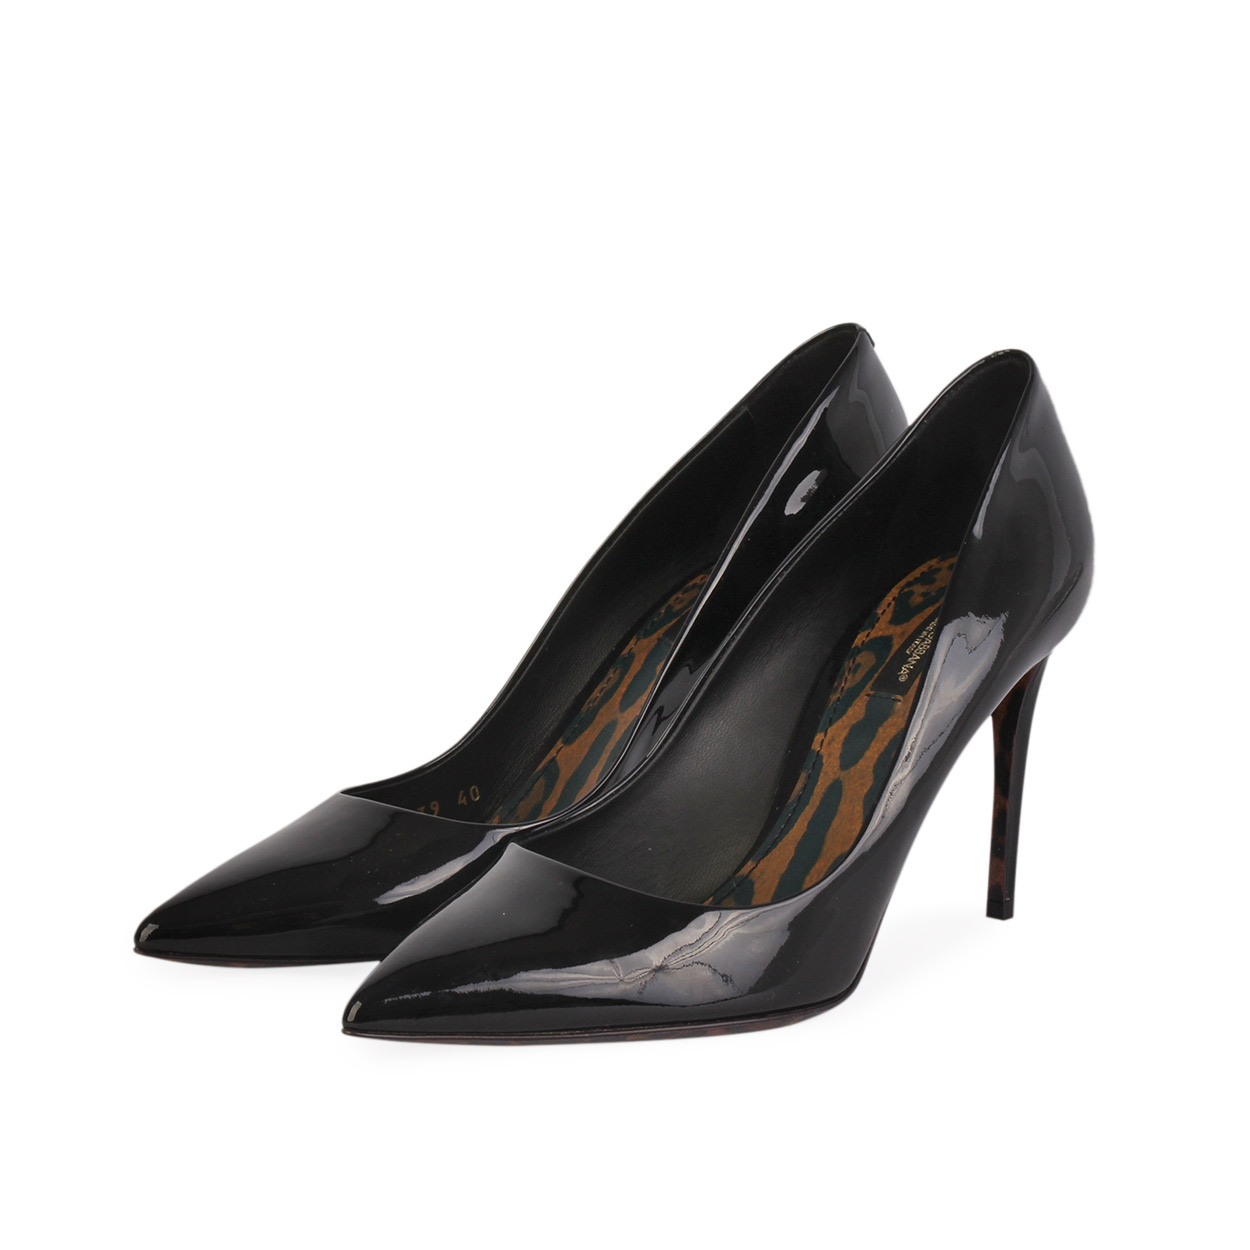 DOLCE & GABANNA Patent Leather Pumps Black - S: 40 (6.5) - NEW | Luxity